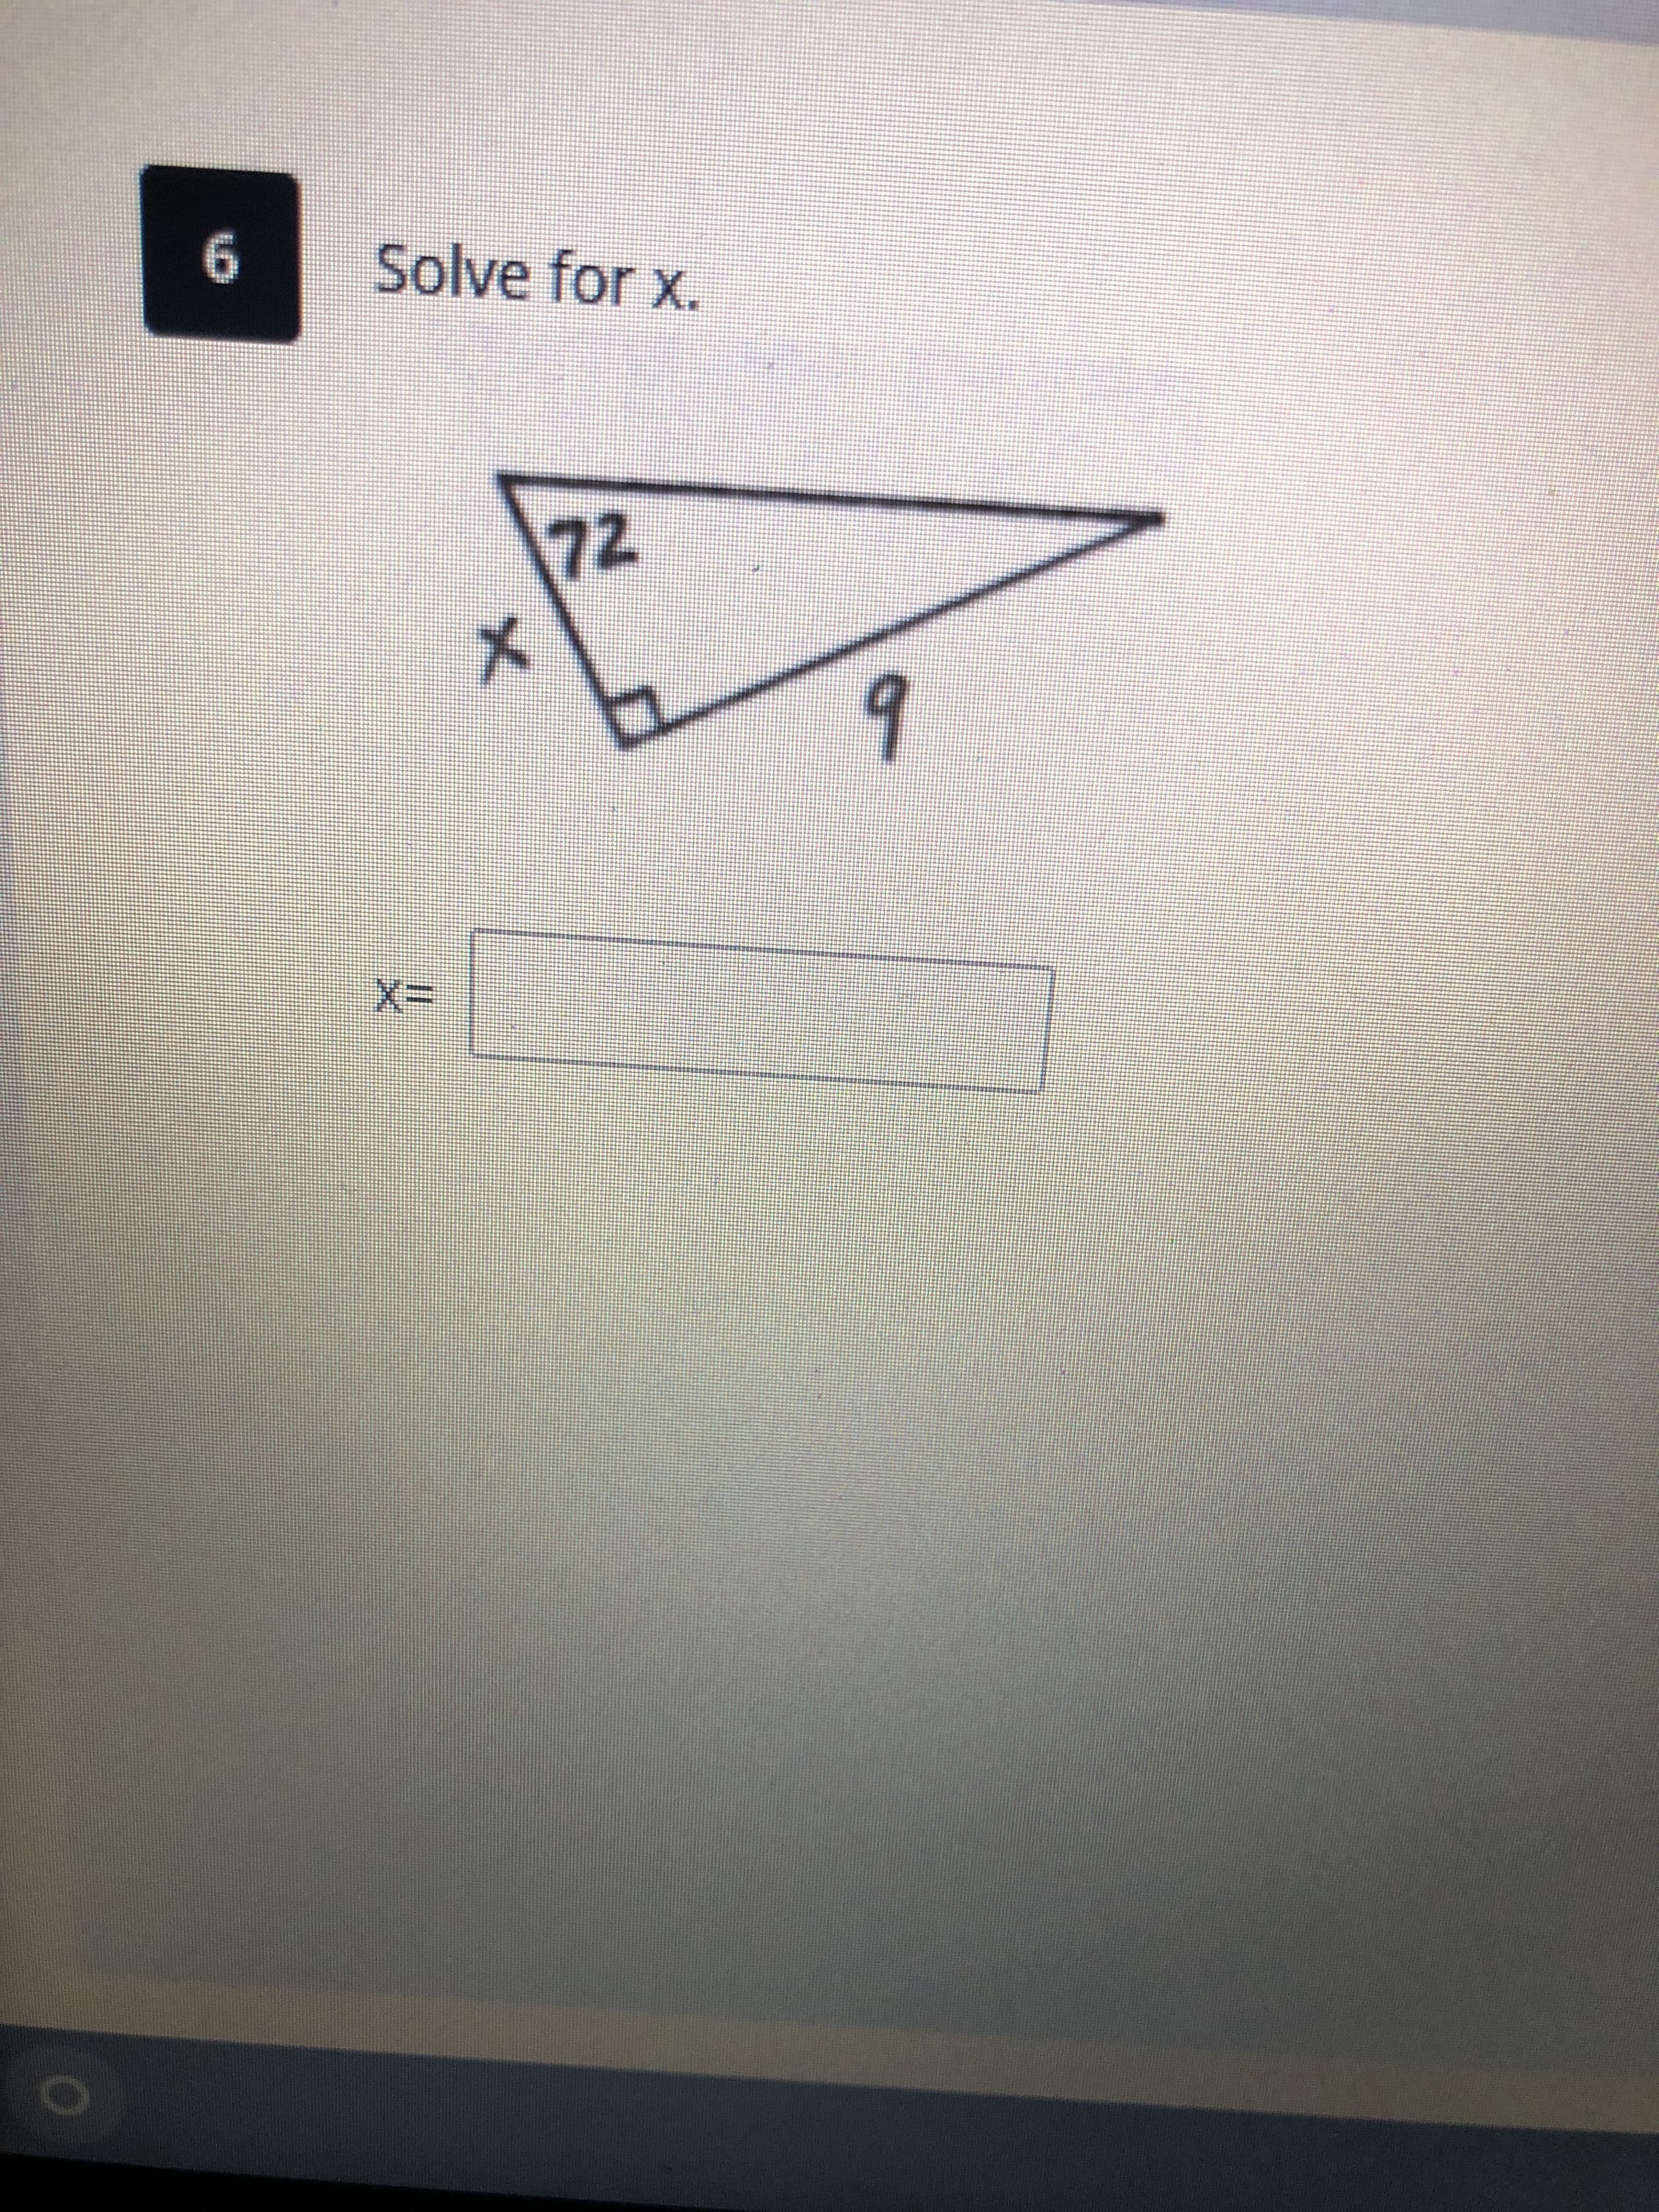 Solve for x.
72
